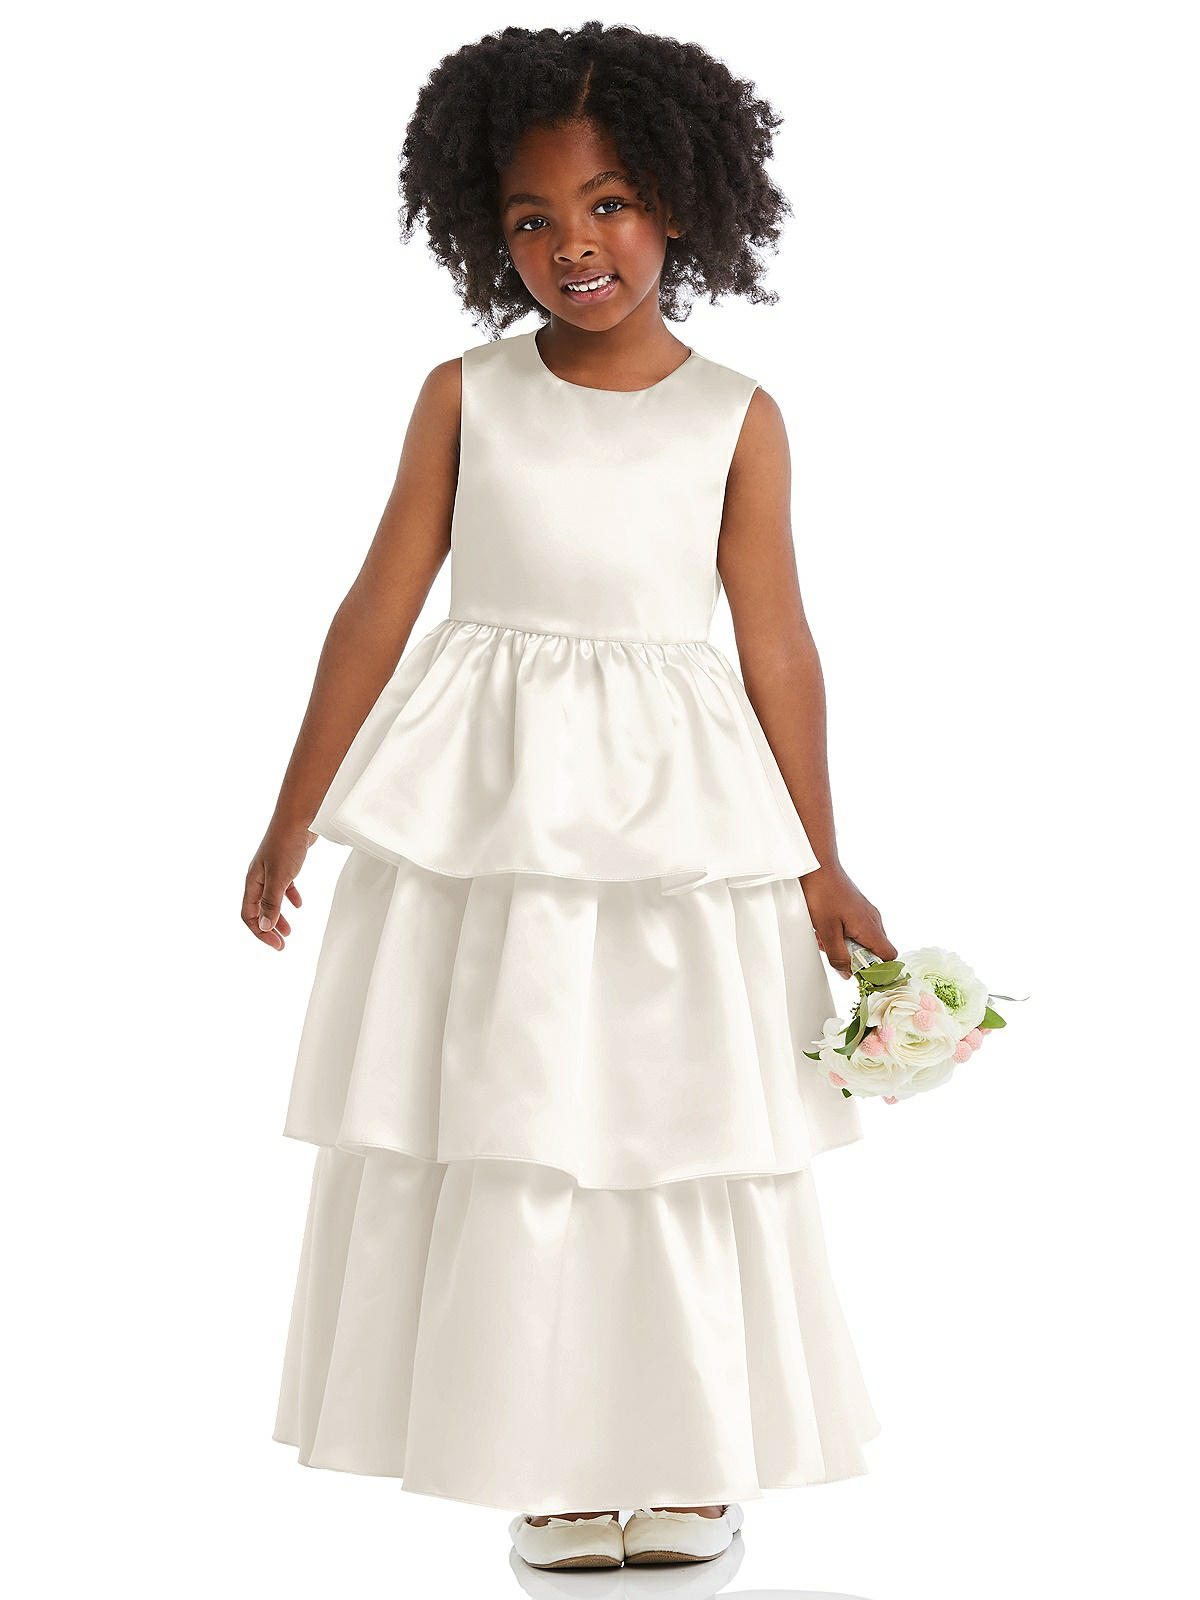 Jewel Neck Tiered Skirt Satin Flower Girl Dress In Ivory | The Dessy Group